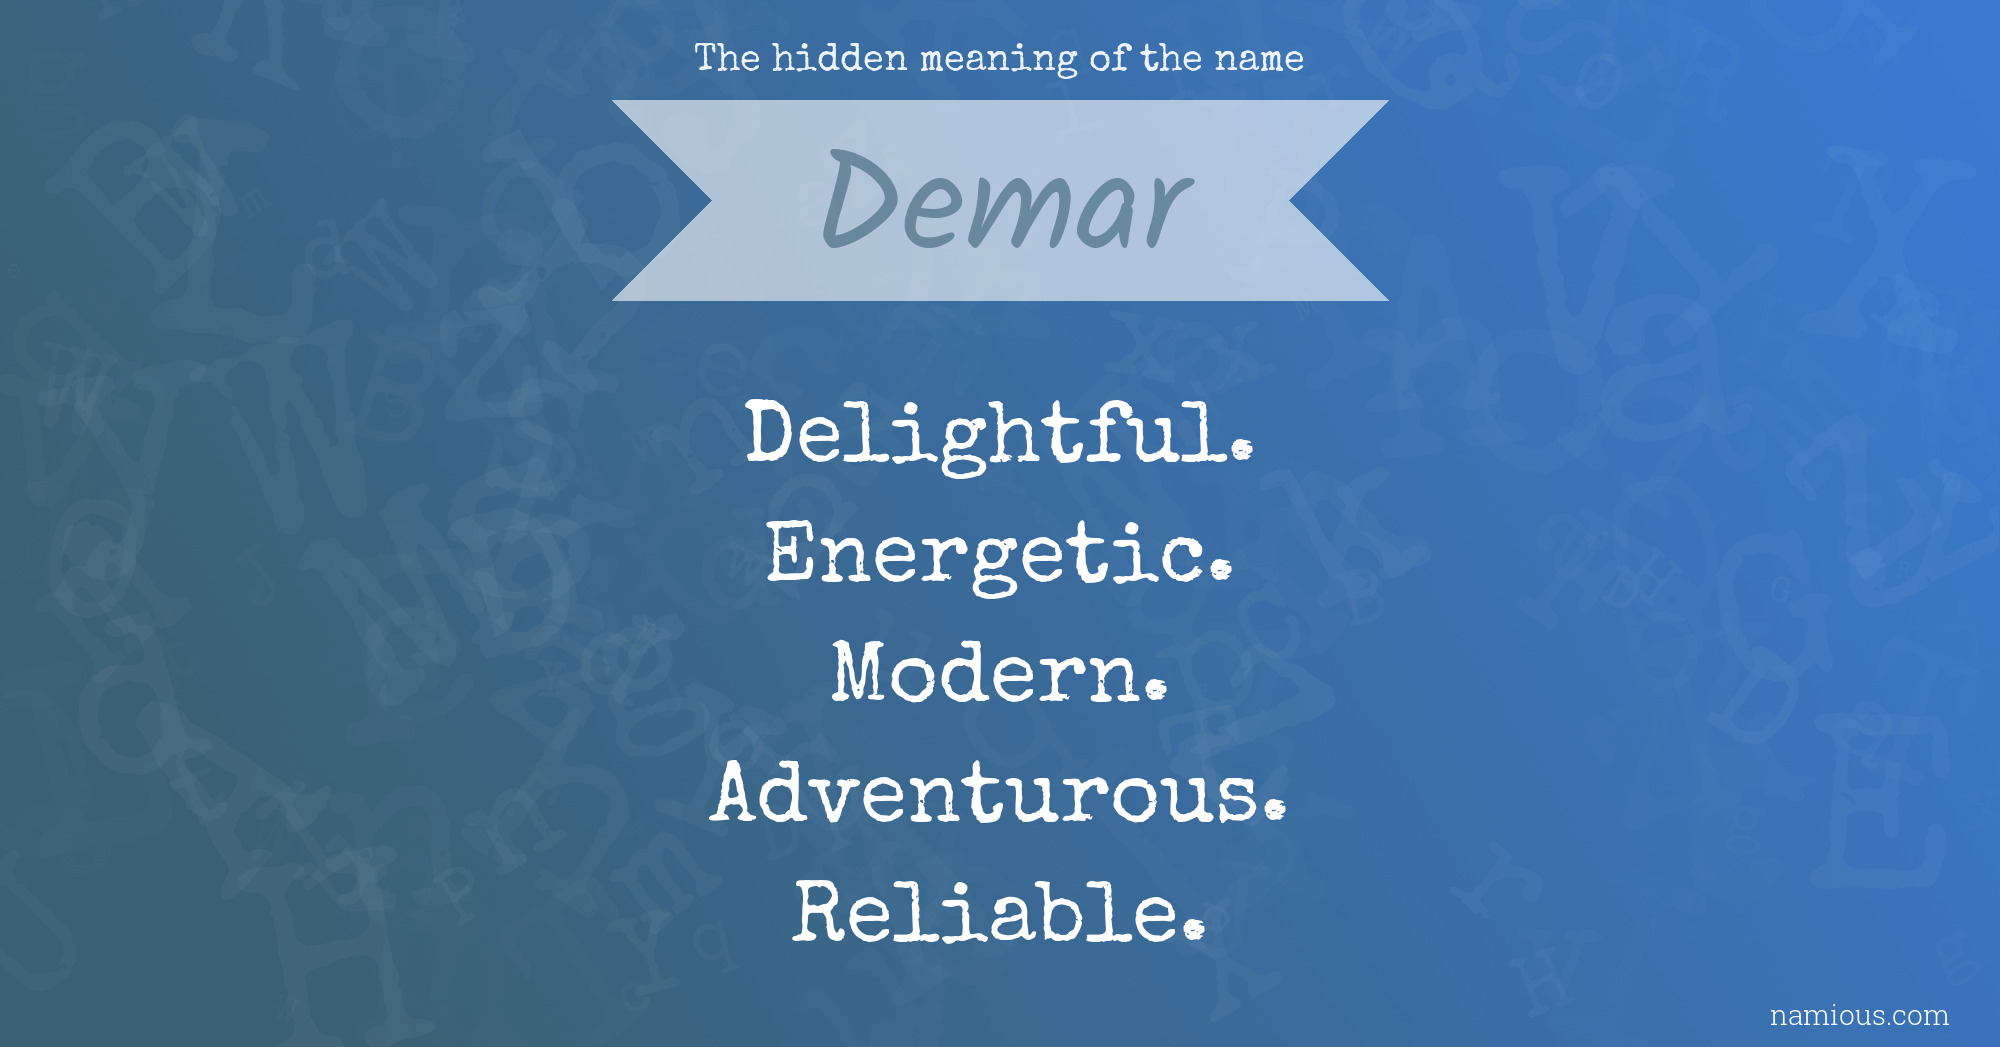 The hidden meaning of the name Demar